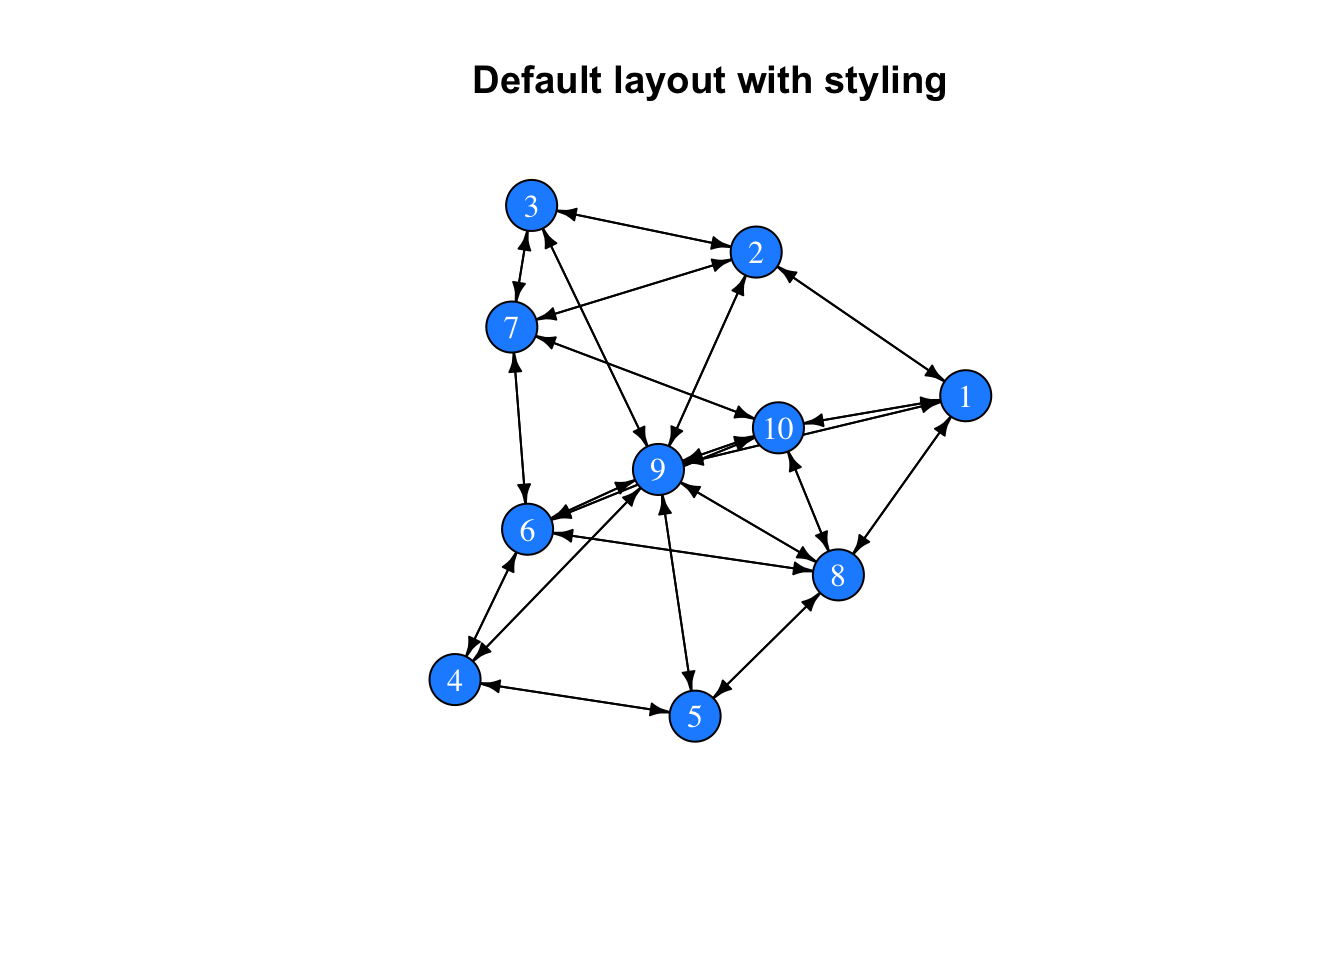 Using syling arguments with the `plot()` function allows to manipulate the appearence of vertices, edges, and labels.